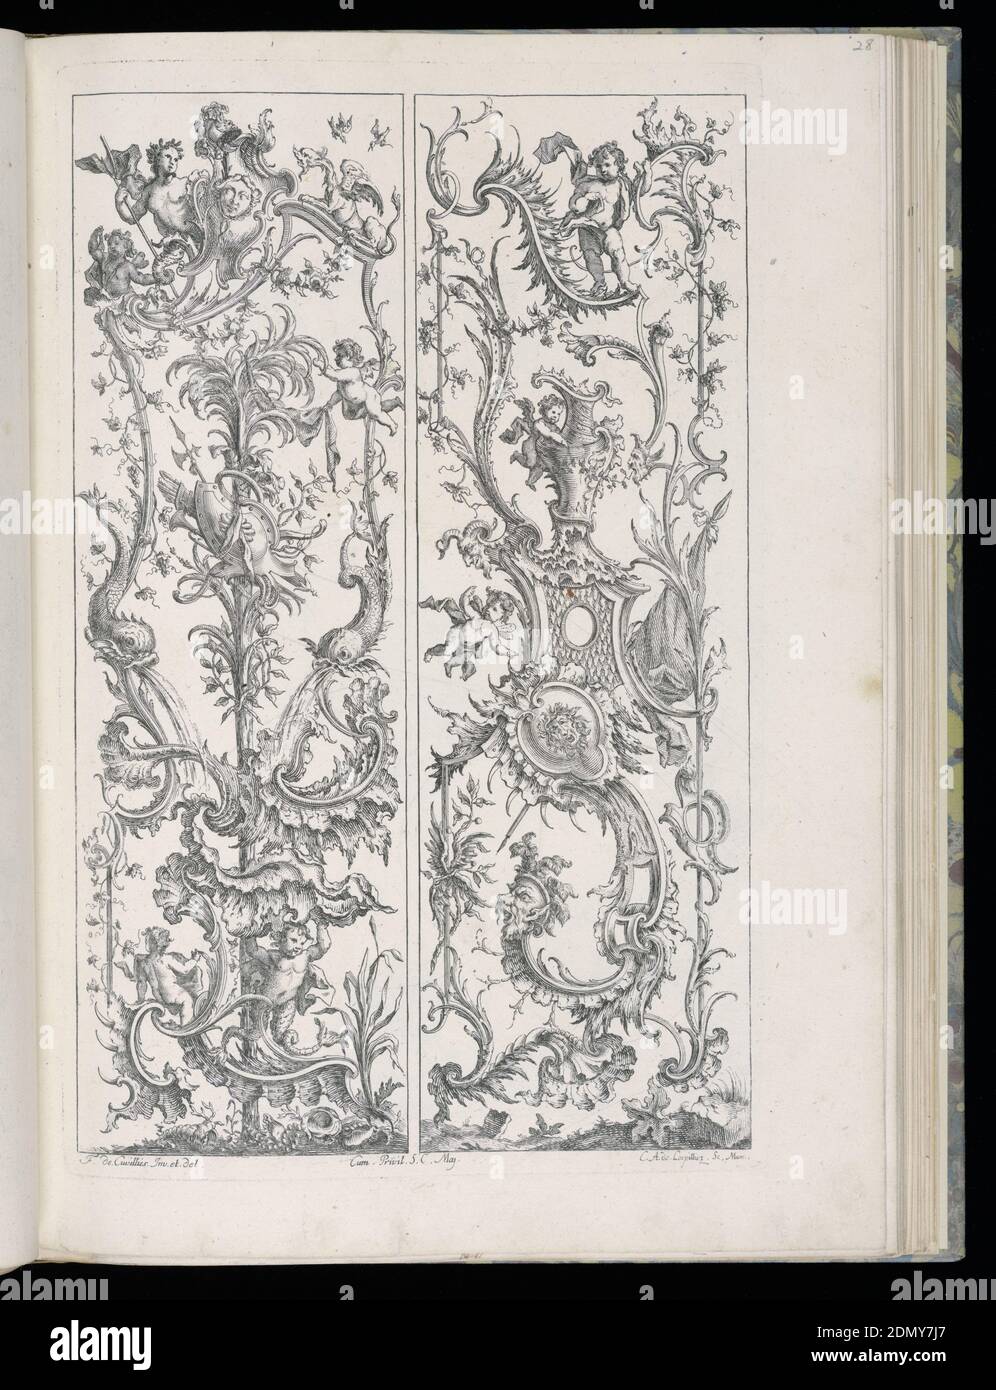 Two Upright Panels, Livre de Paneaux irréguliers (Book of Irregular Panels), François de Cuvilliés the Elder, Belgian, active Germany, 1695 - 1768, Carl Albert von Lespilliez, German, 1723 - 1796, François de Cuvilliés the Elder, Belgian, active Germany, 1695 - 1768, Engraving on paper, Two designs for upright panels in Rococo style. Left panel: a palm tree with an armorial trophy at center, flanked by two dolphins spewing water below. Above, a group of putti, a male figure, and a dragon. Right panel: rocaille motifs with an urn at center. Various putti throughout., Munich, Germany, 1738 Stock Photo